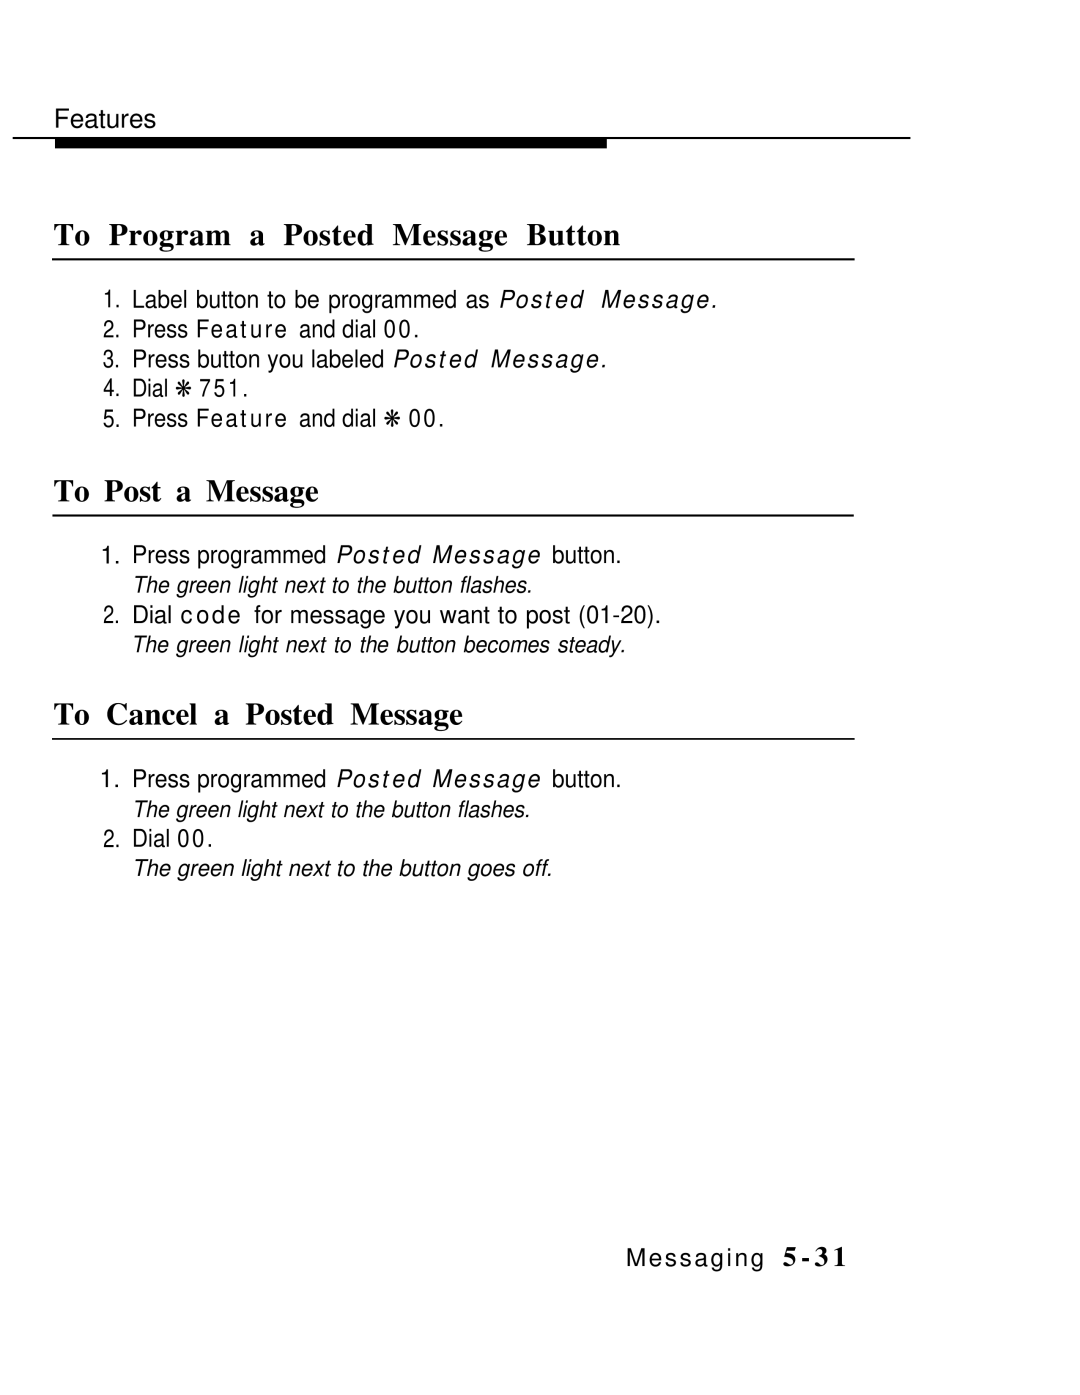 AT&T MLX-10 manual To Program a Posted Message Button, To Post a Message, To Cancel a Posted Message 